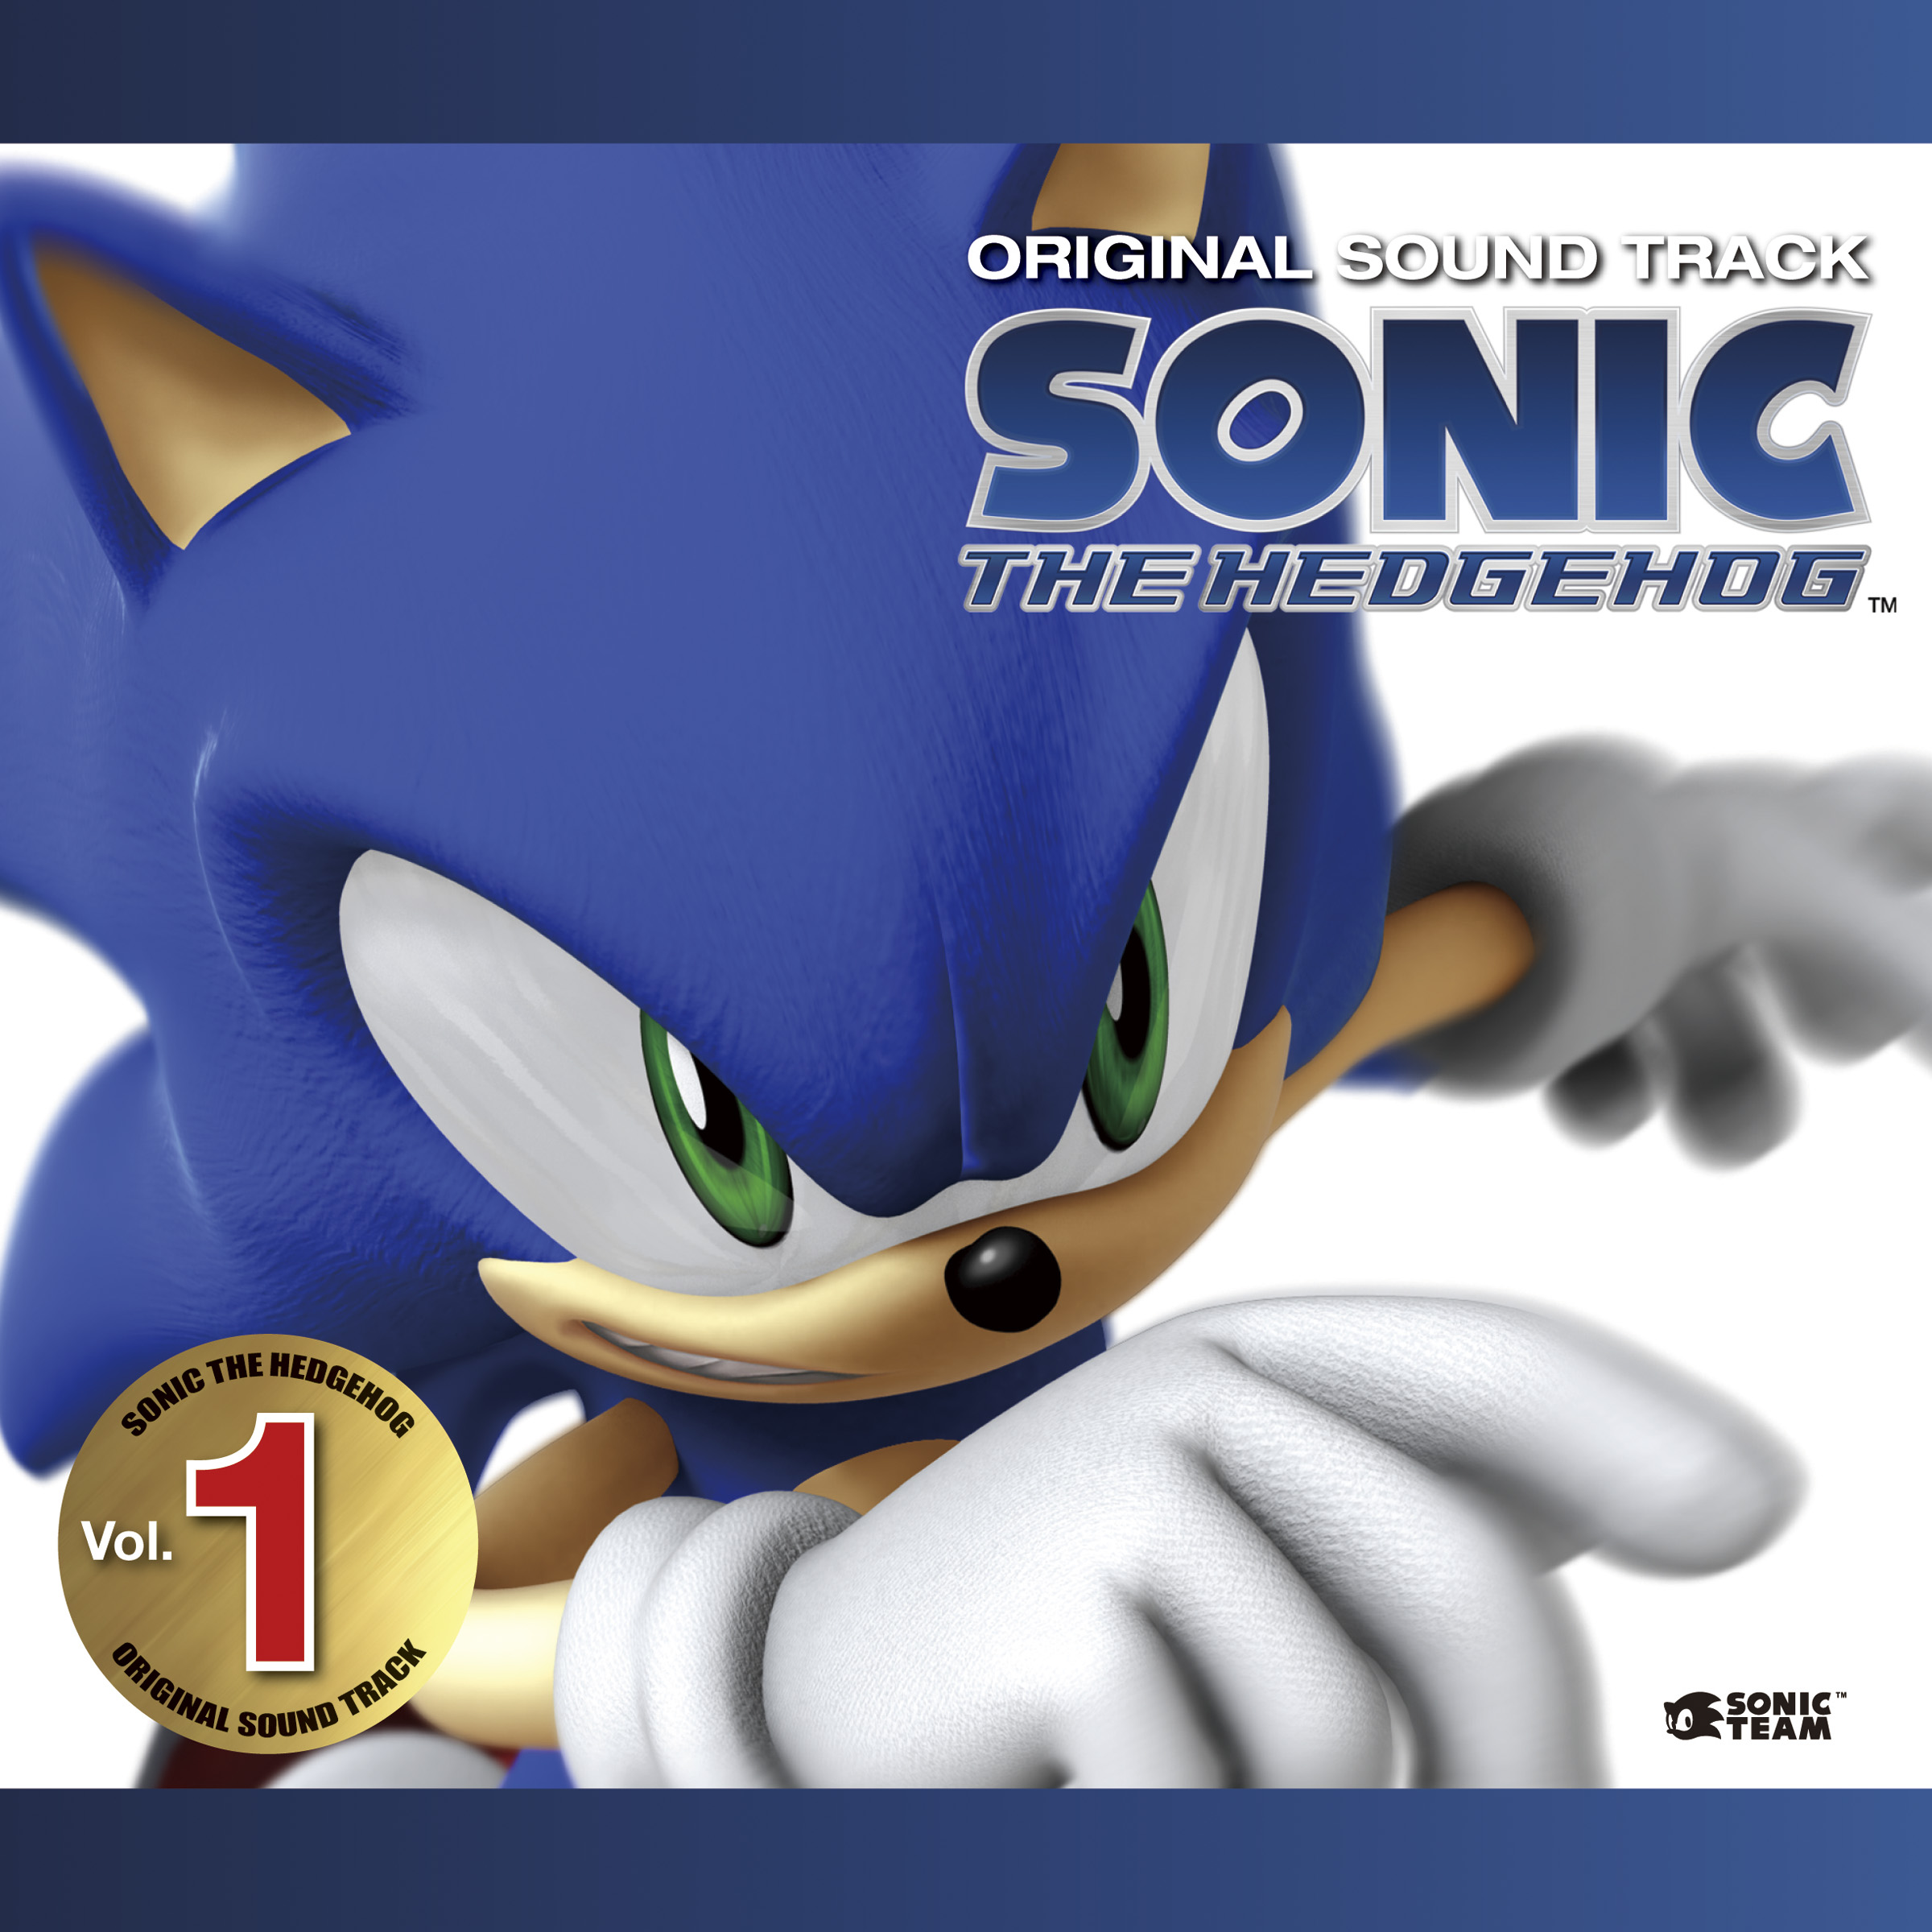 sonic heroes ost download